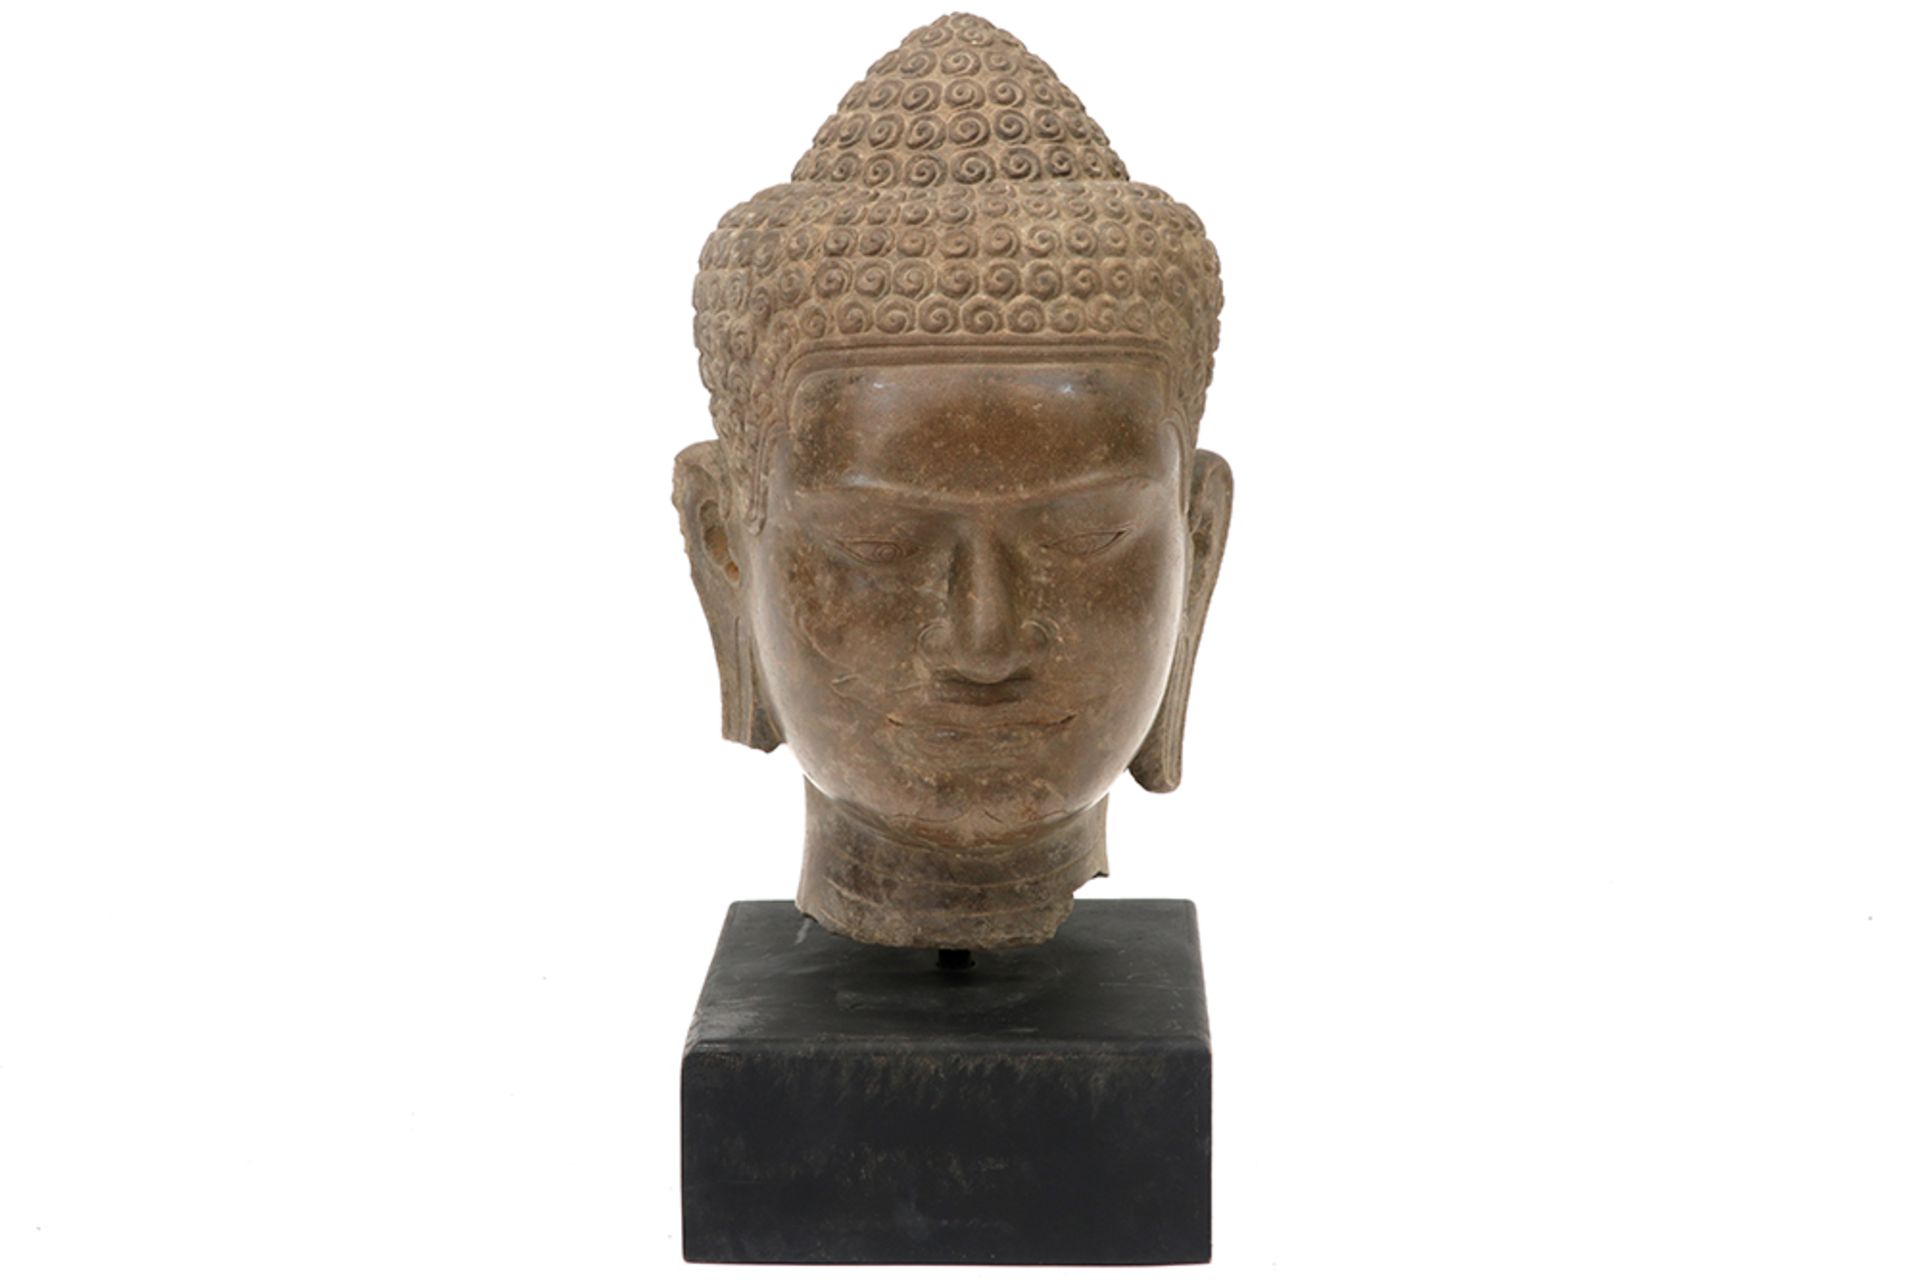 Cambodian "Man's head" sculpture in stone collection of Dr Istvan Zelnik who bought it from